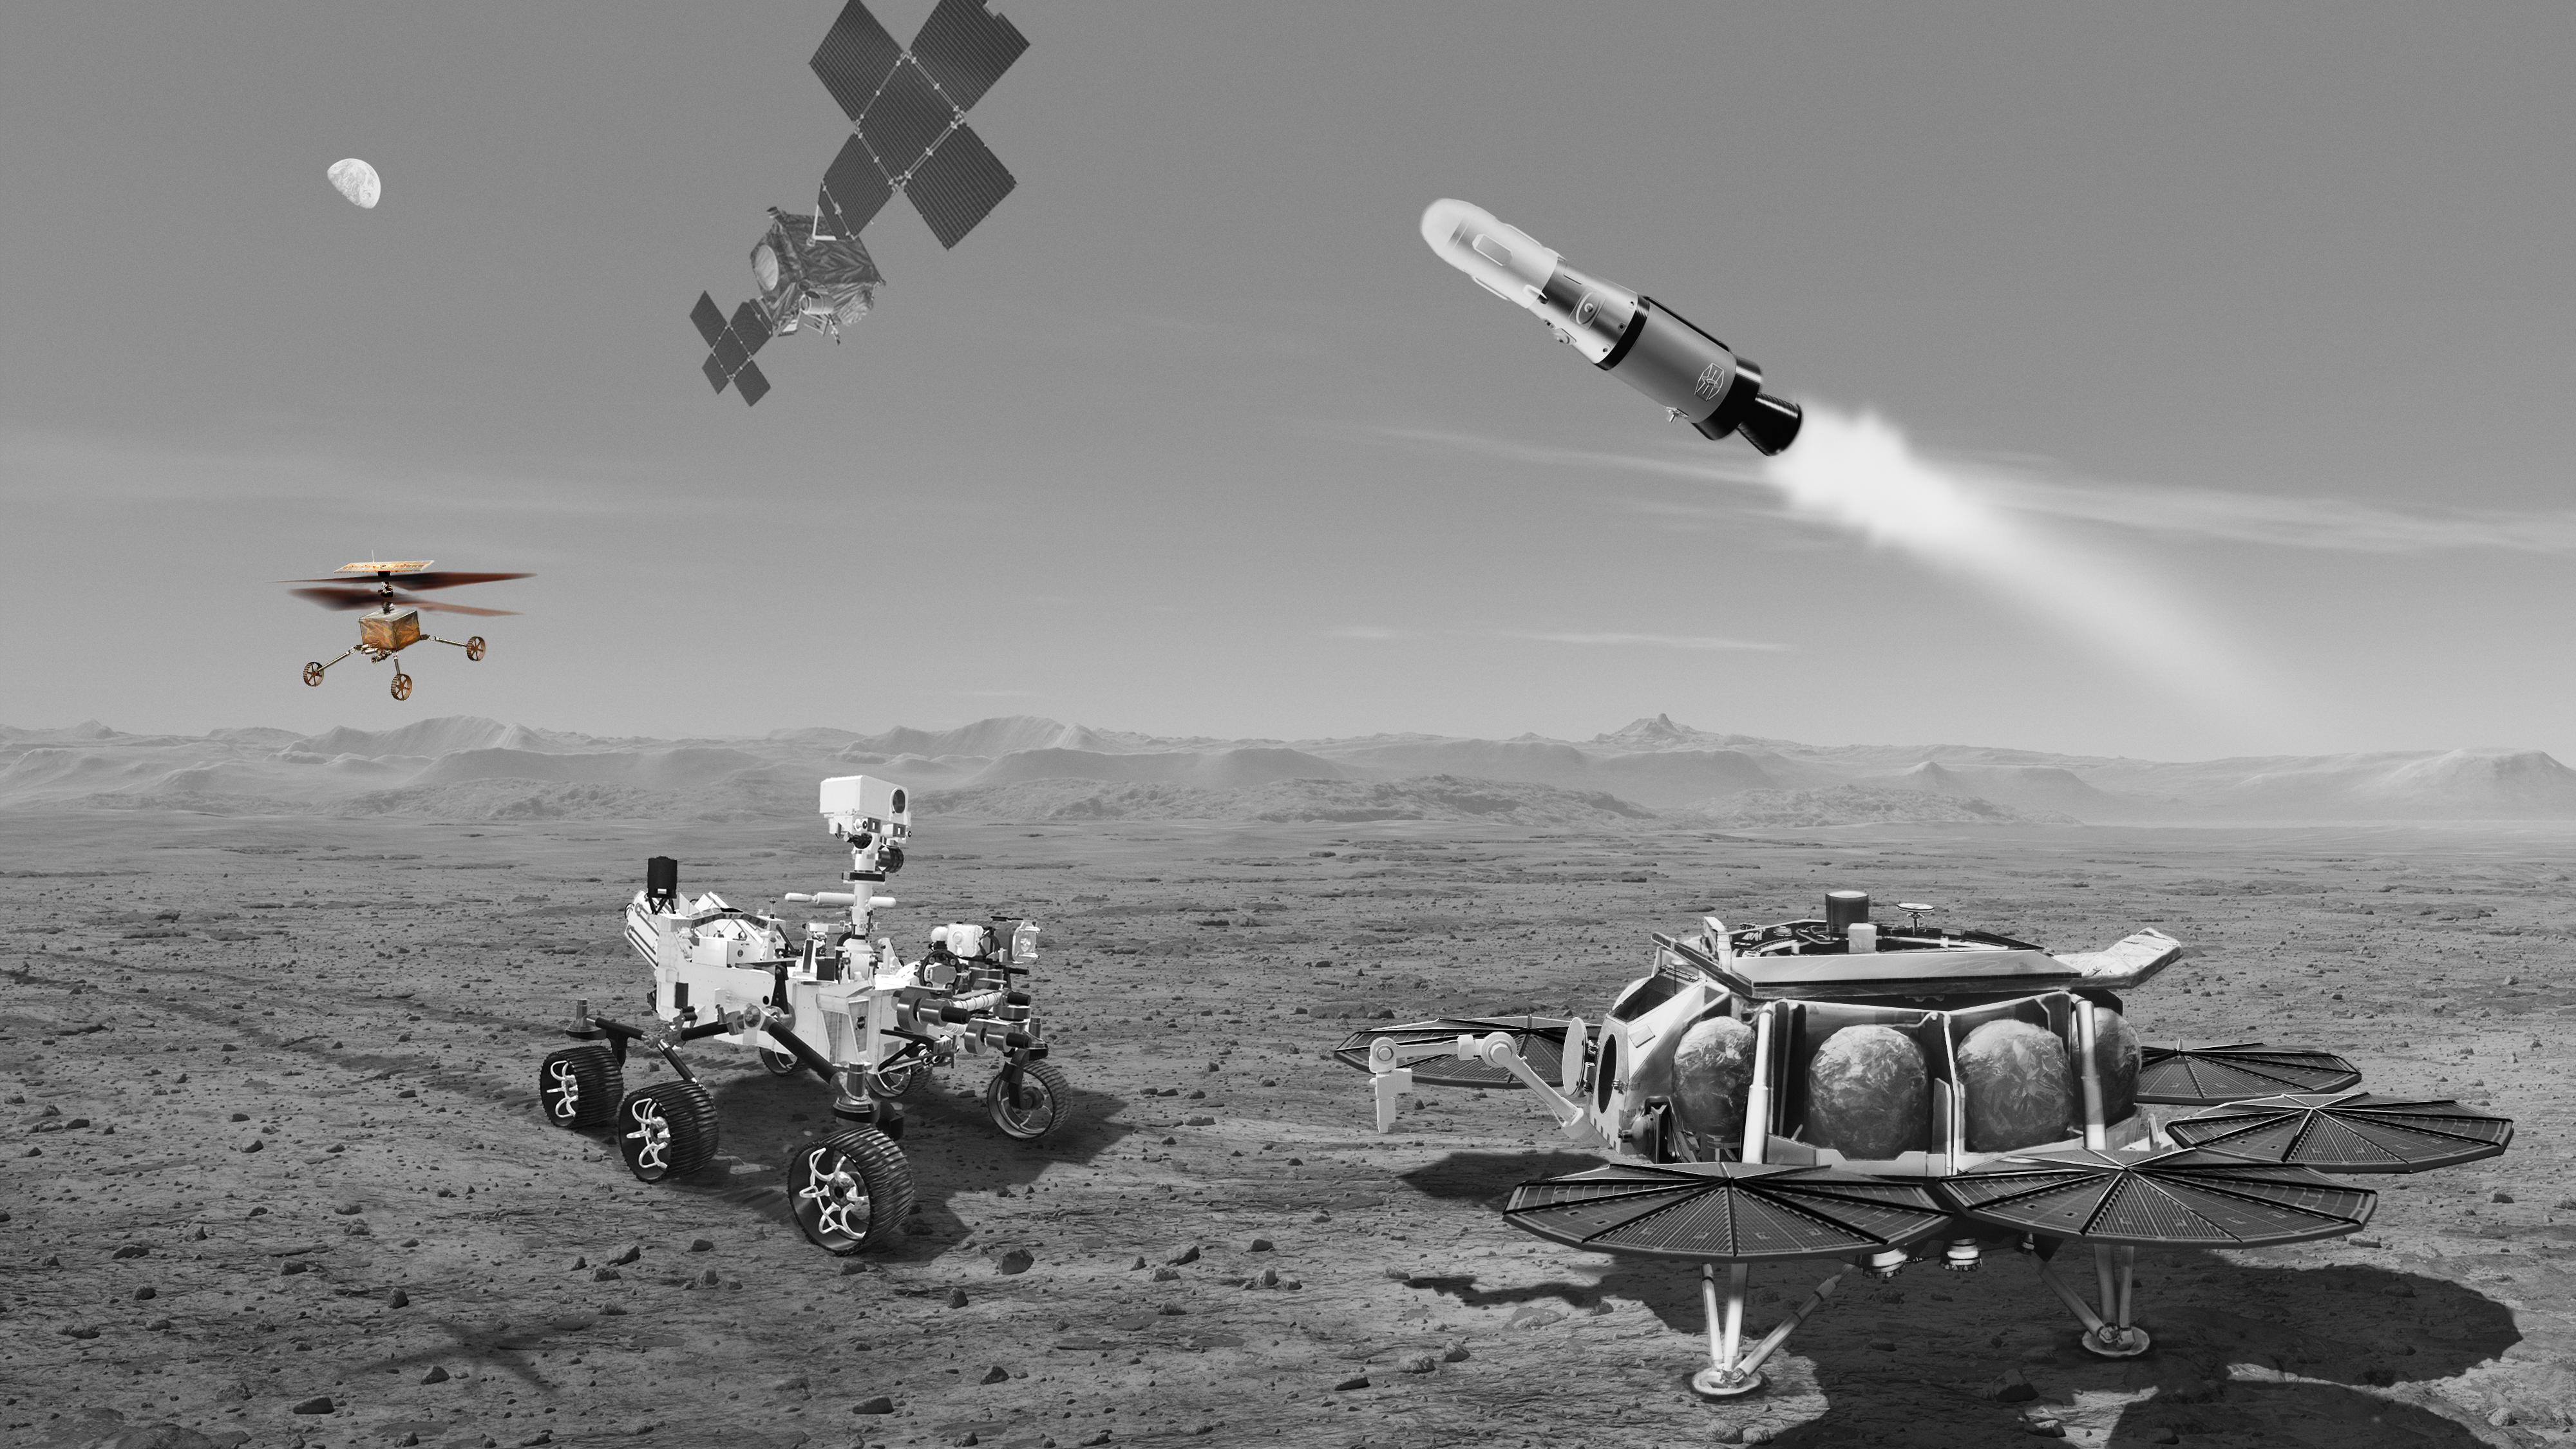 Artist's concept of all five vehicles in the Mars Sample Return mission, a rover, a lander, an orbiter, a helicopter and a rocket. The helicopter is highlighted in this image.